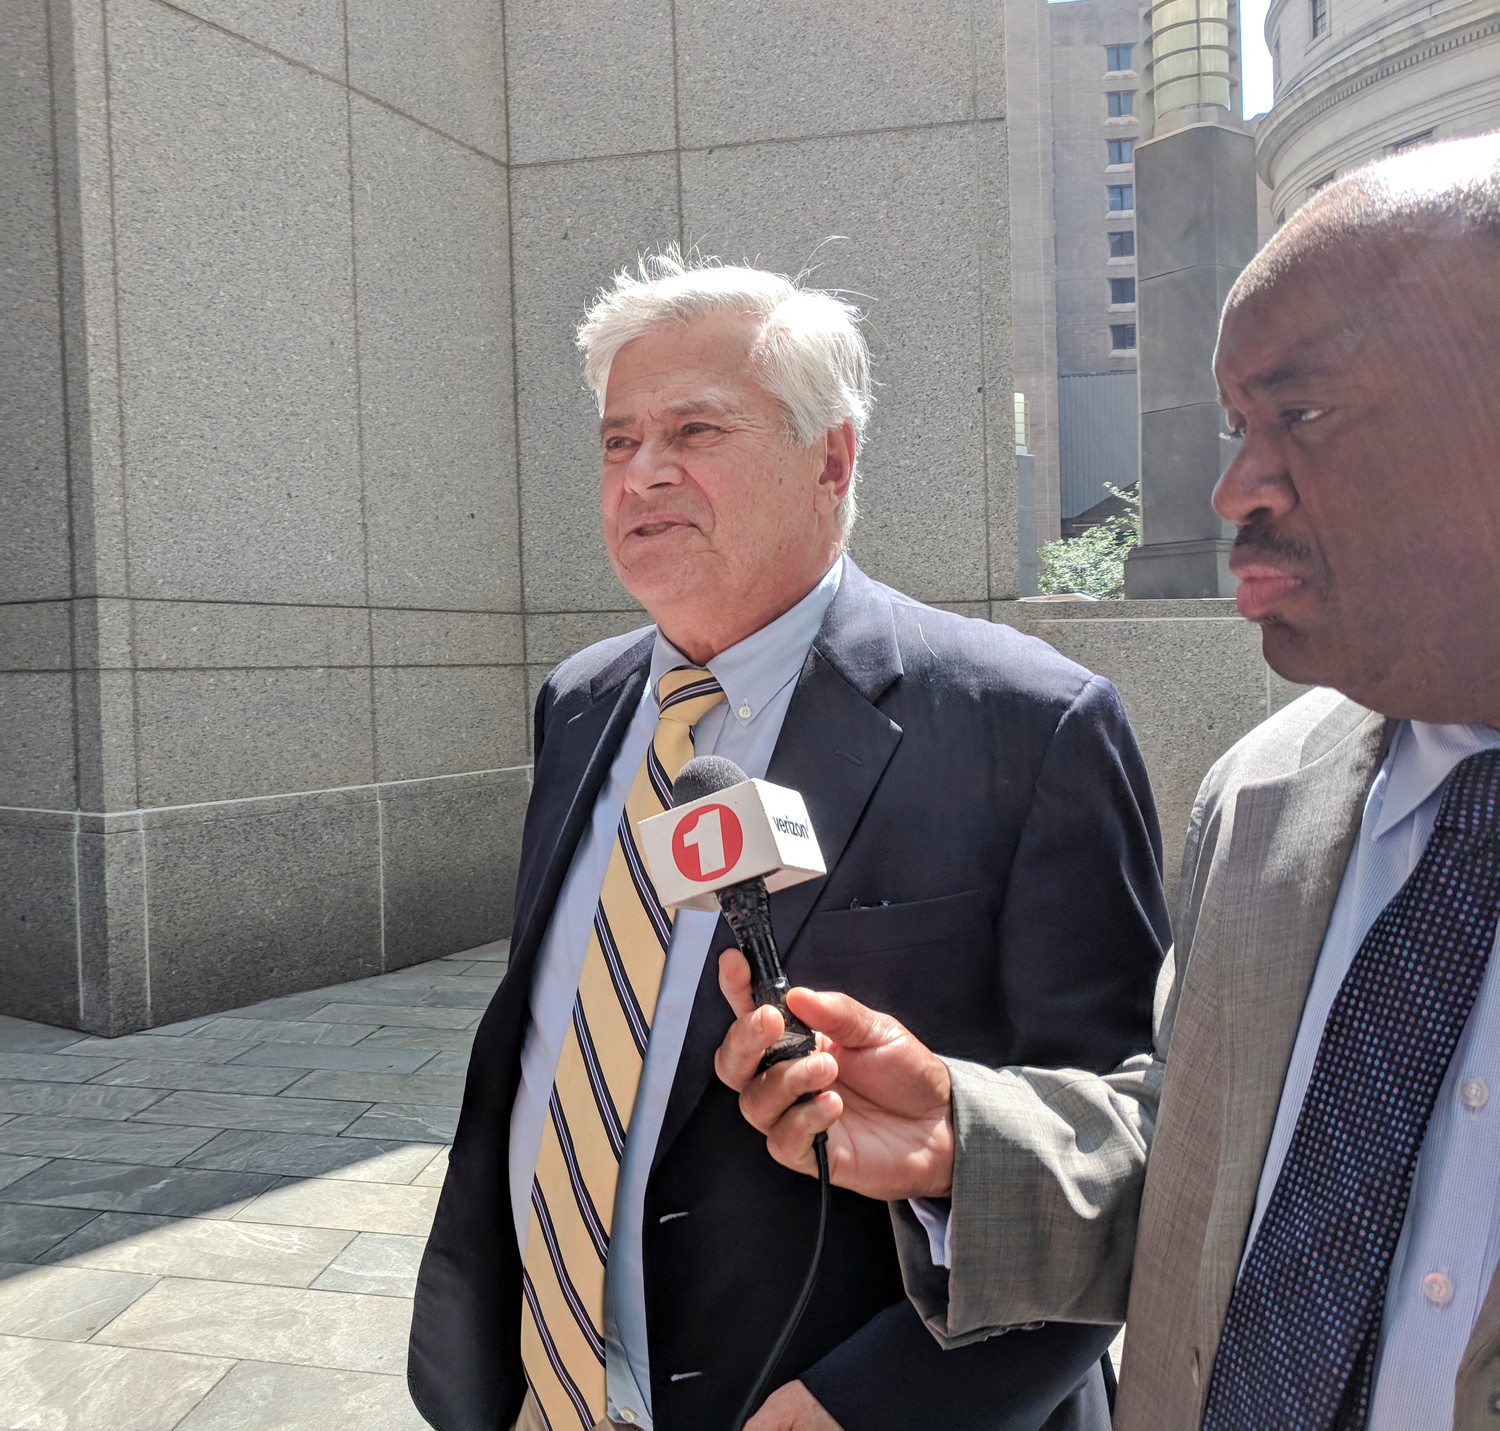 A jury found Dean Skelos, pictured, and his son, Adam, guilty Tuesday after his corruption retrial.